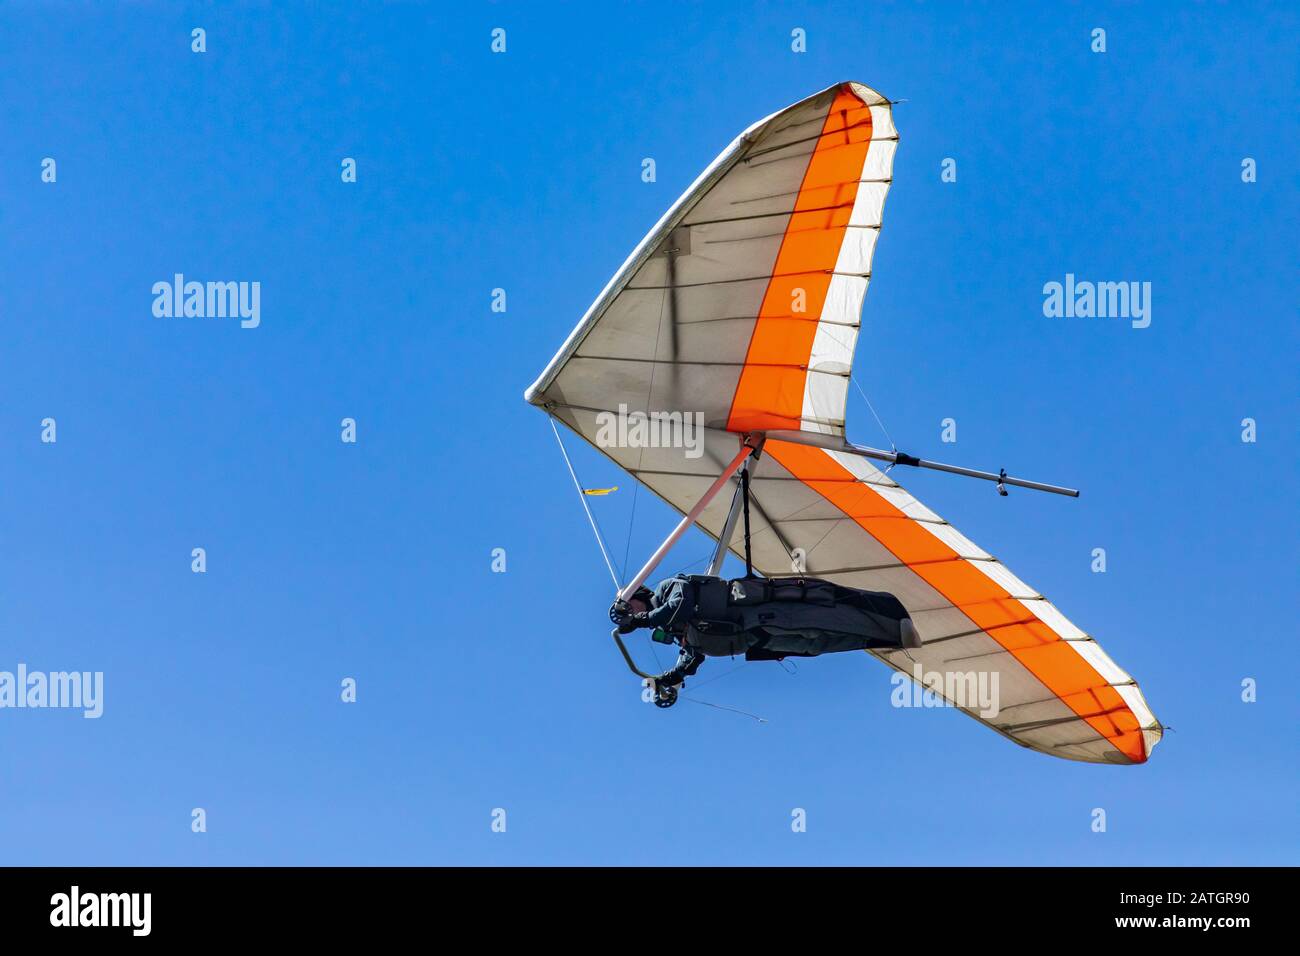 Hang gliding Lessons & Tandems, Airsports Sussex